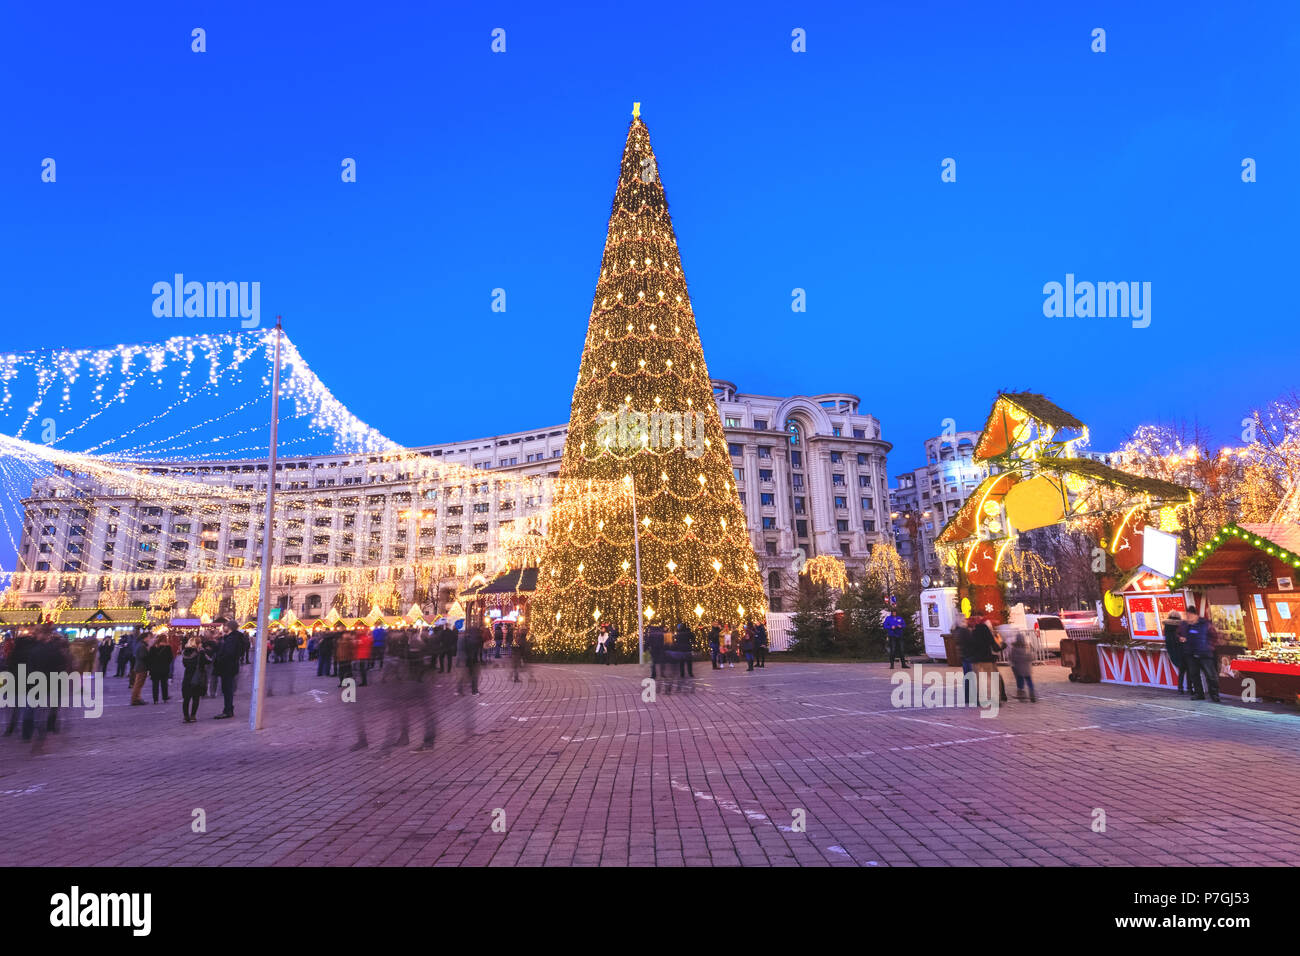 Christmas tree in winter holiday market of Bucharest. People celebrating Christmas outdoor in the main square of the Capital Stock Photo